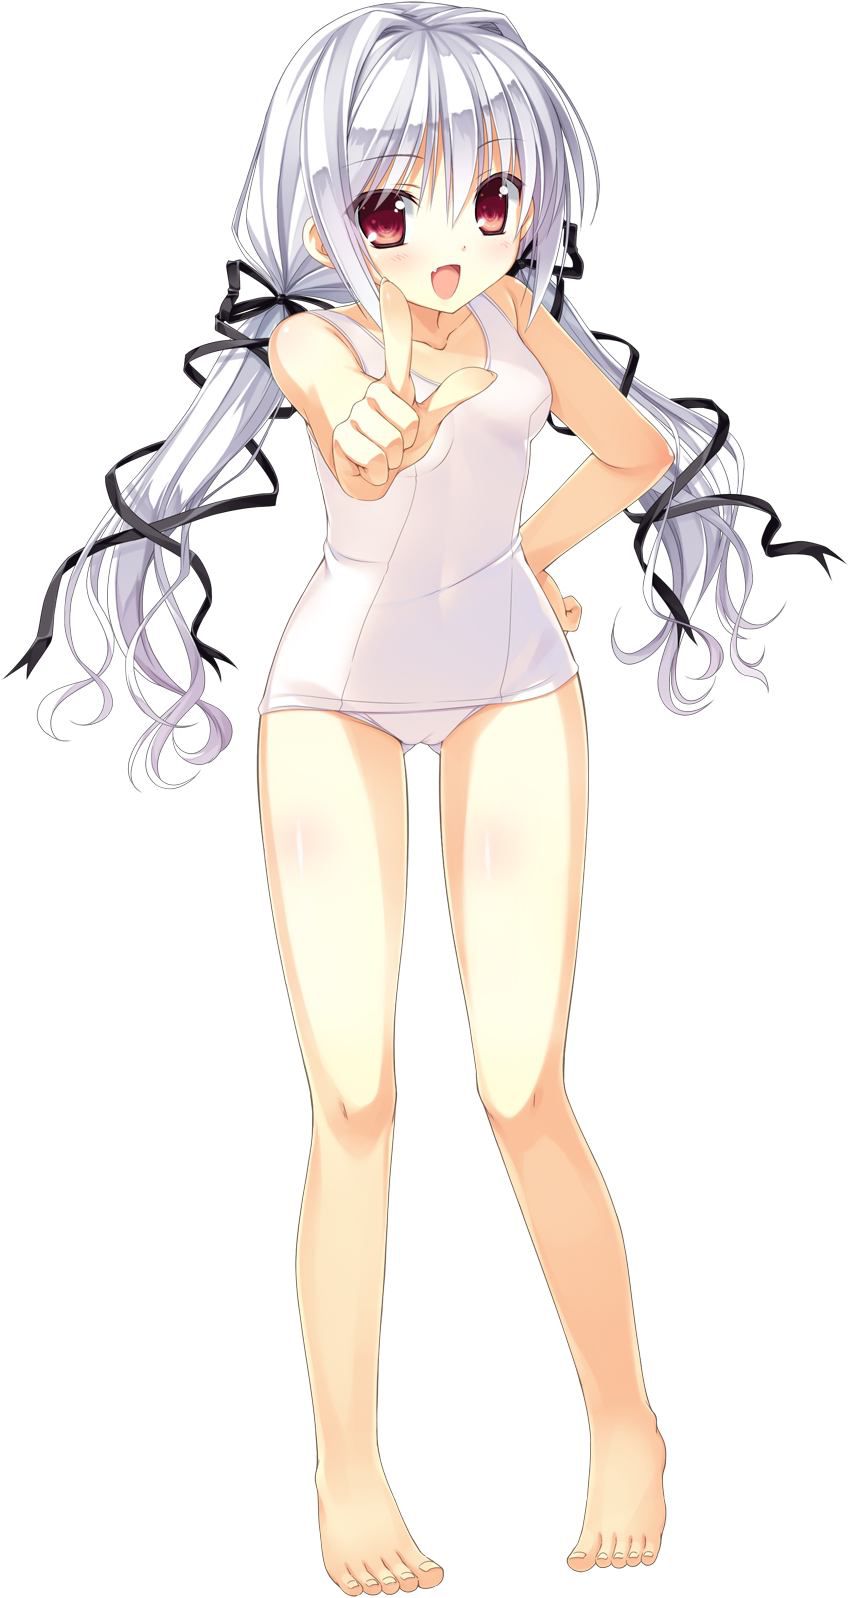 A swimsuit image that is deprived of a little time 10